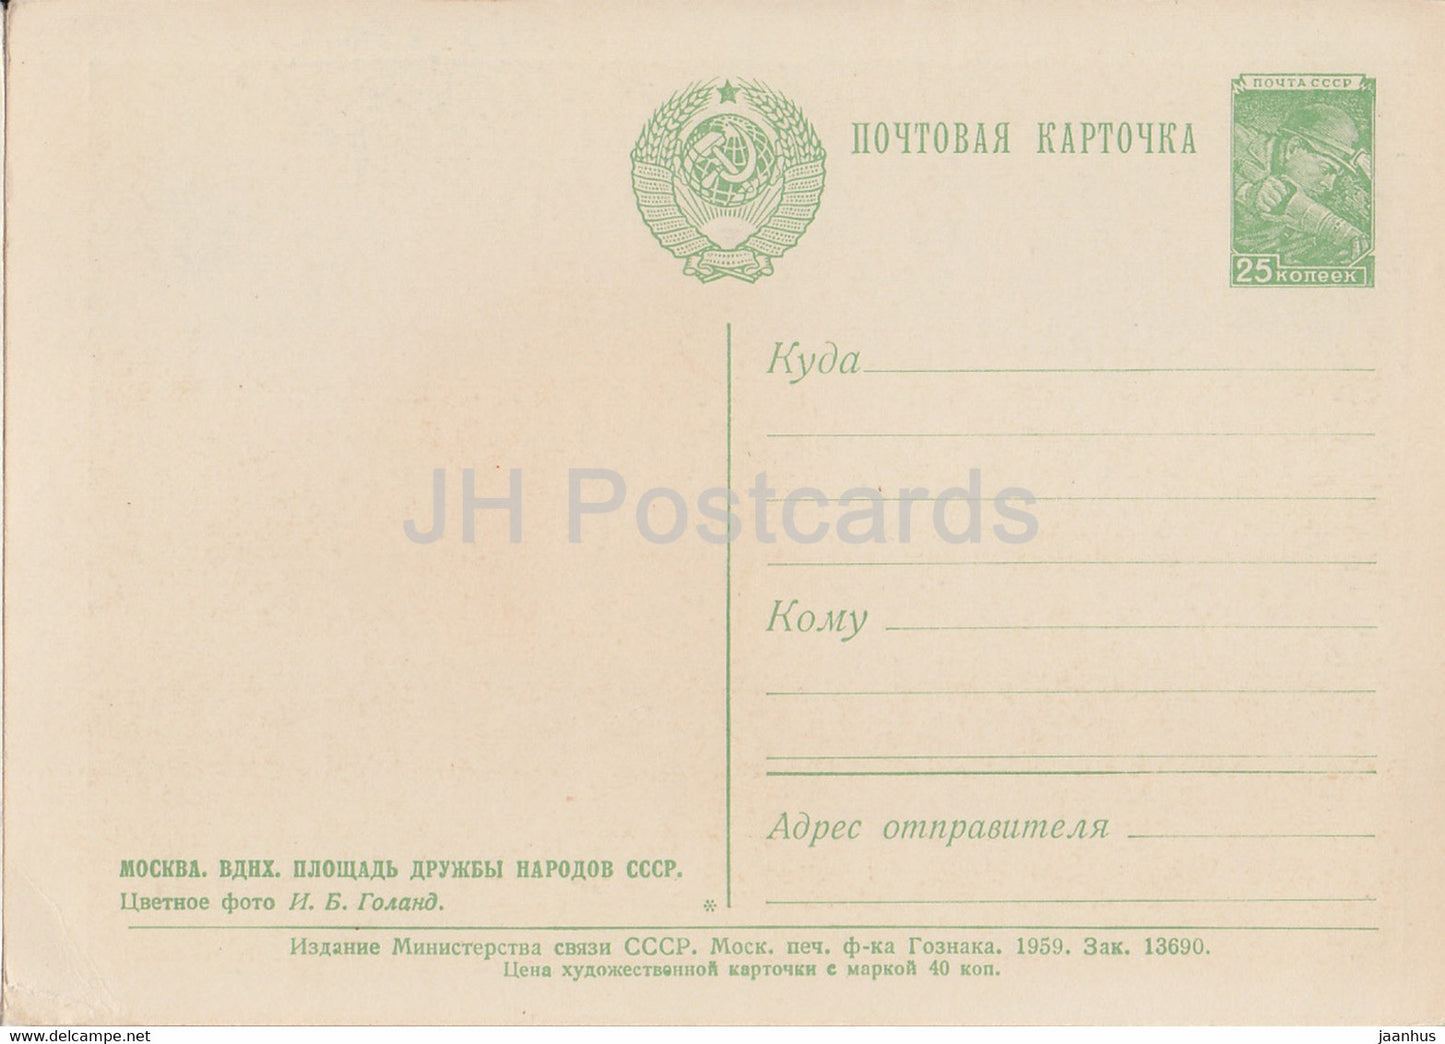 Moscow - VDNKh - Friendship of Peoples Square - postal stationery - 1959 - Russia USSR - unused